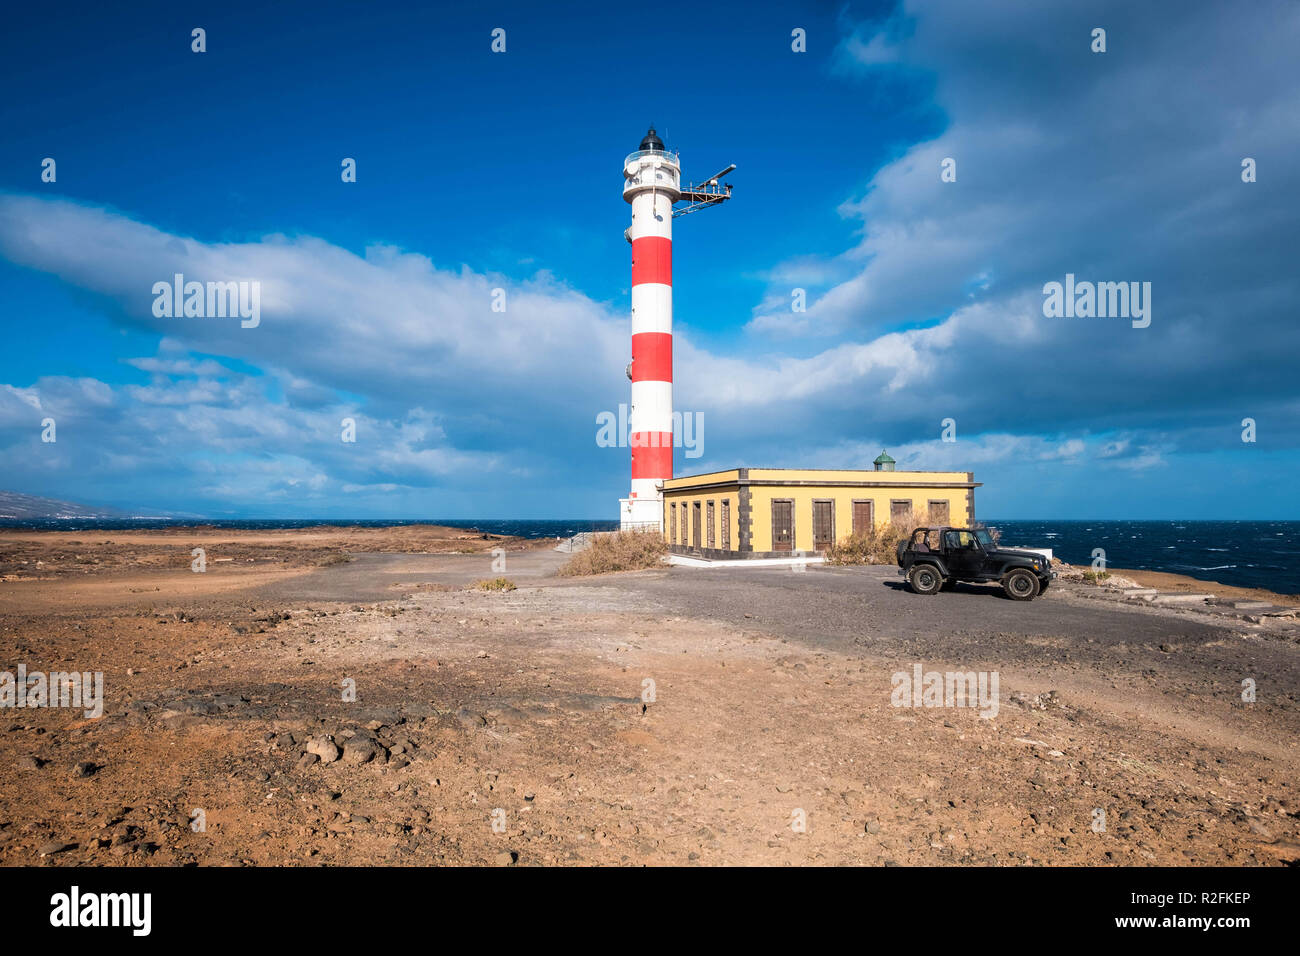 living a dream with a tiny home lighthouse near the coast and the power of the waves. Ocean and sky. Black offroad car parked outside Stock Photo